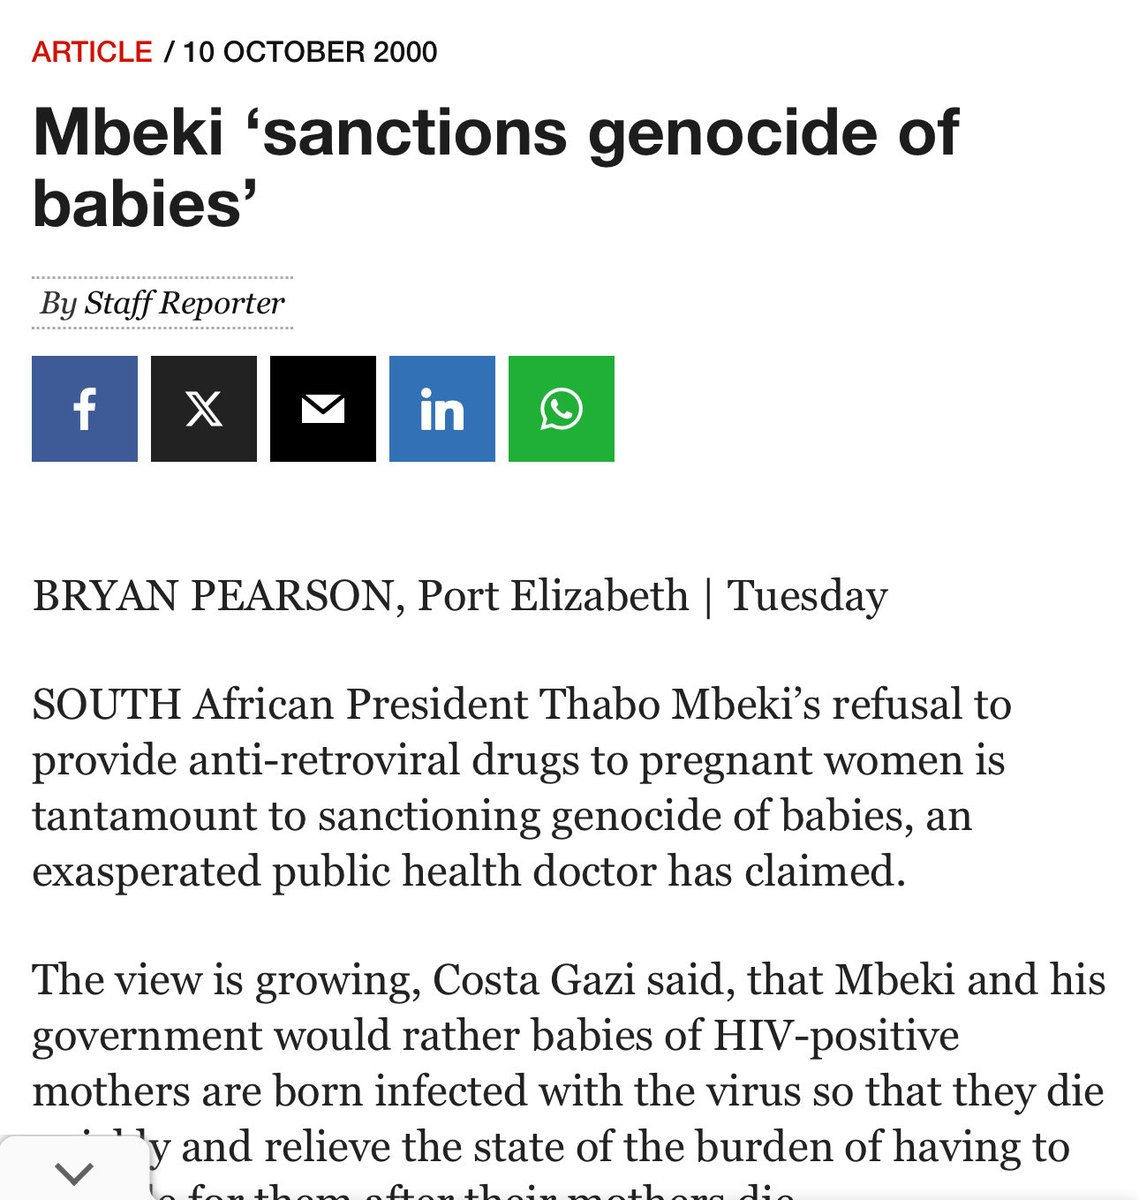 We will not forget the sanctioned death of our 300 000 people by Mbeki by denying them the HIV-medications